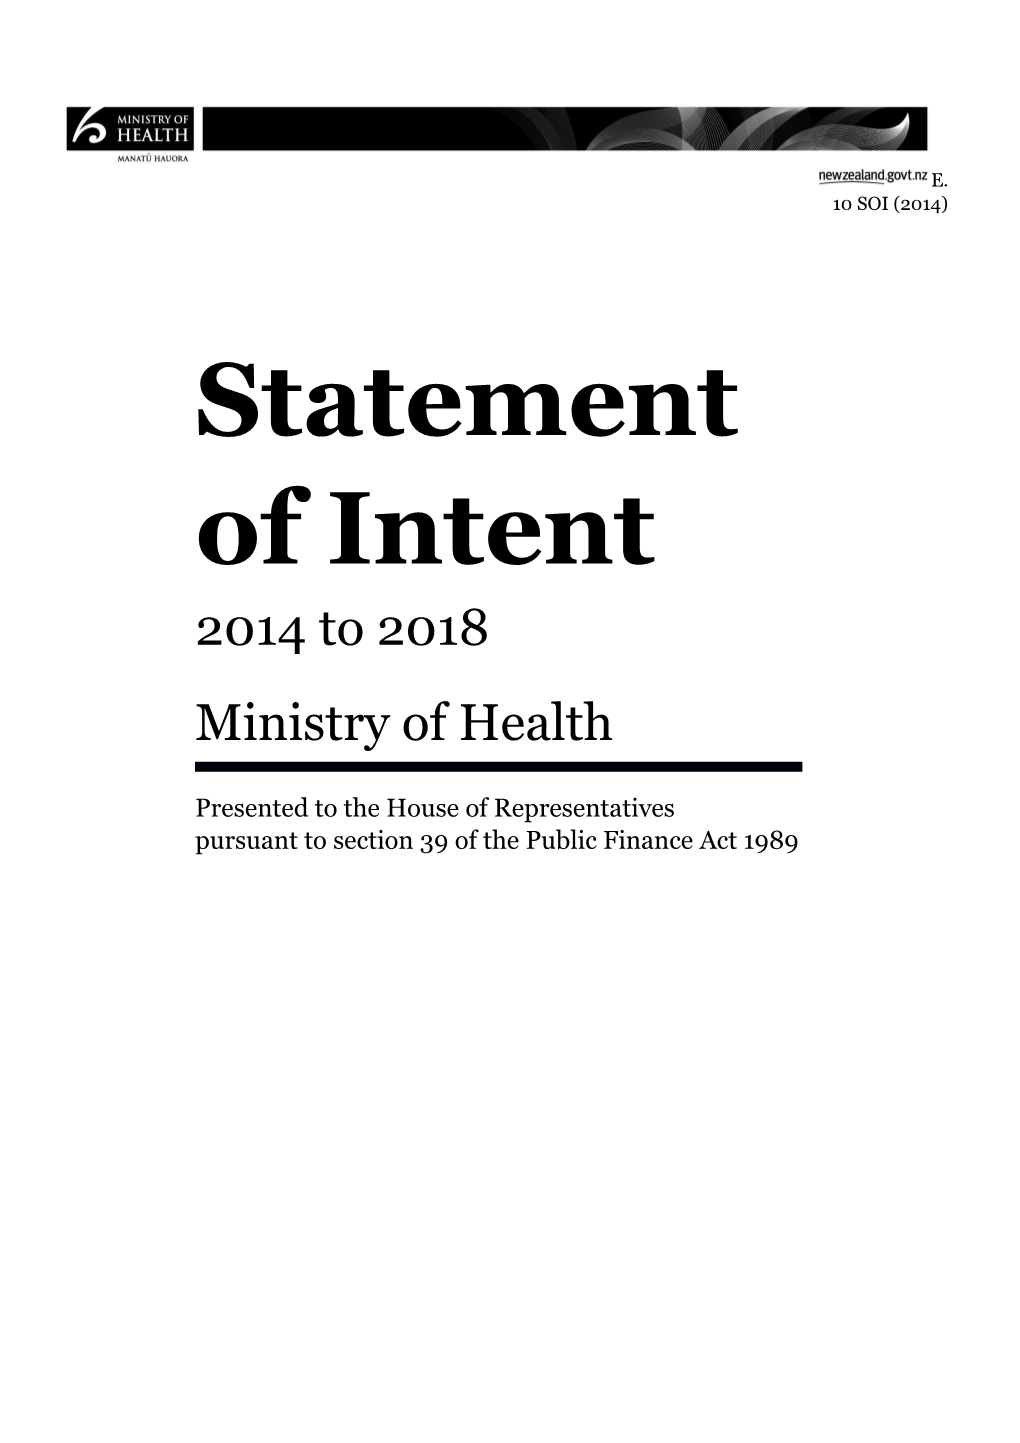 Statement of Intent 2104 to 2018